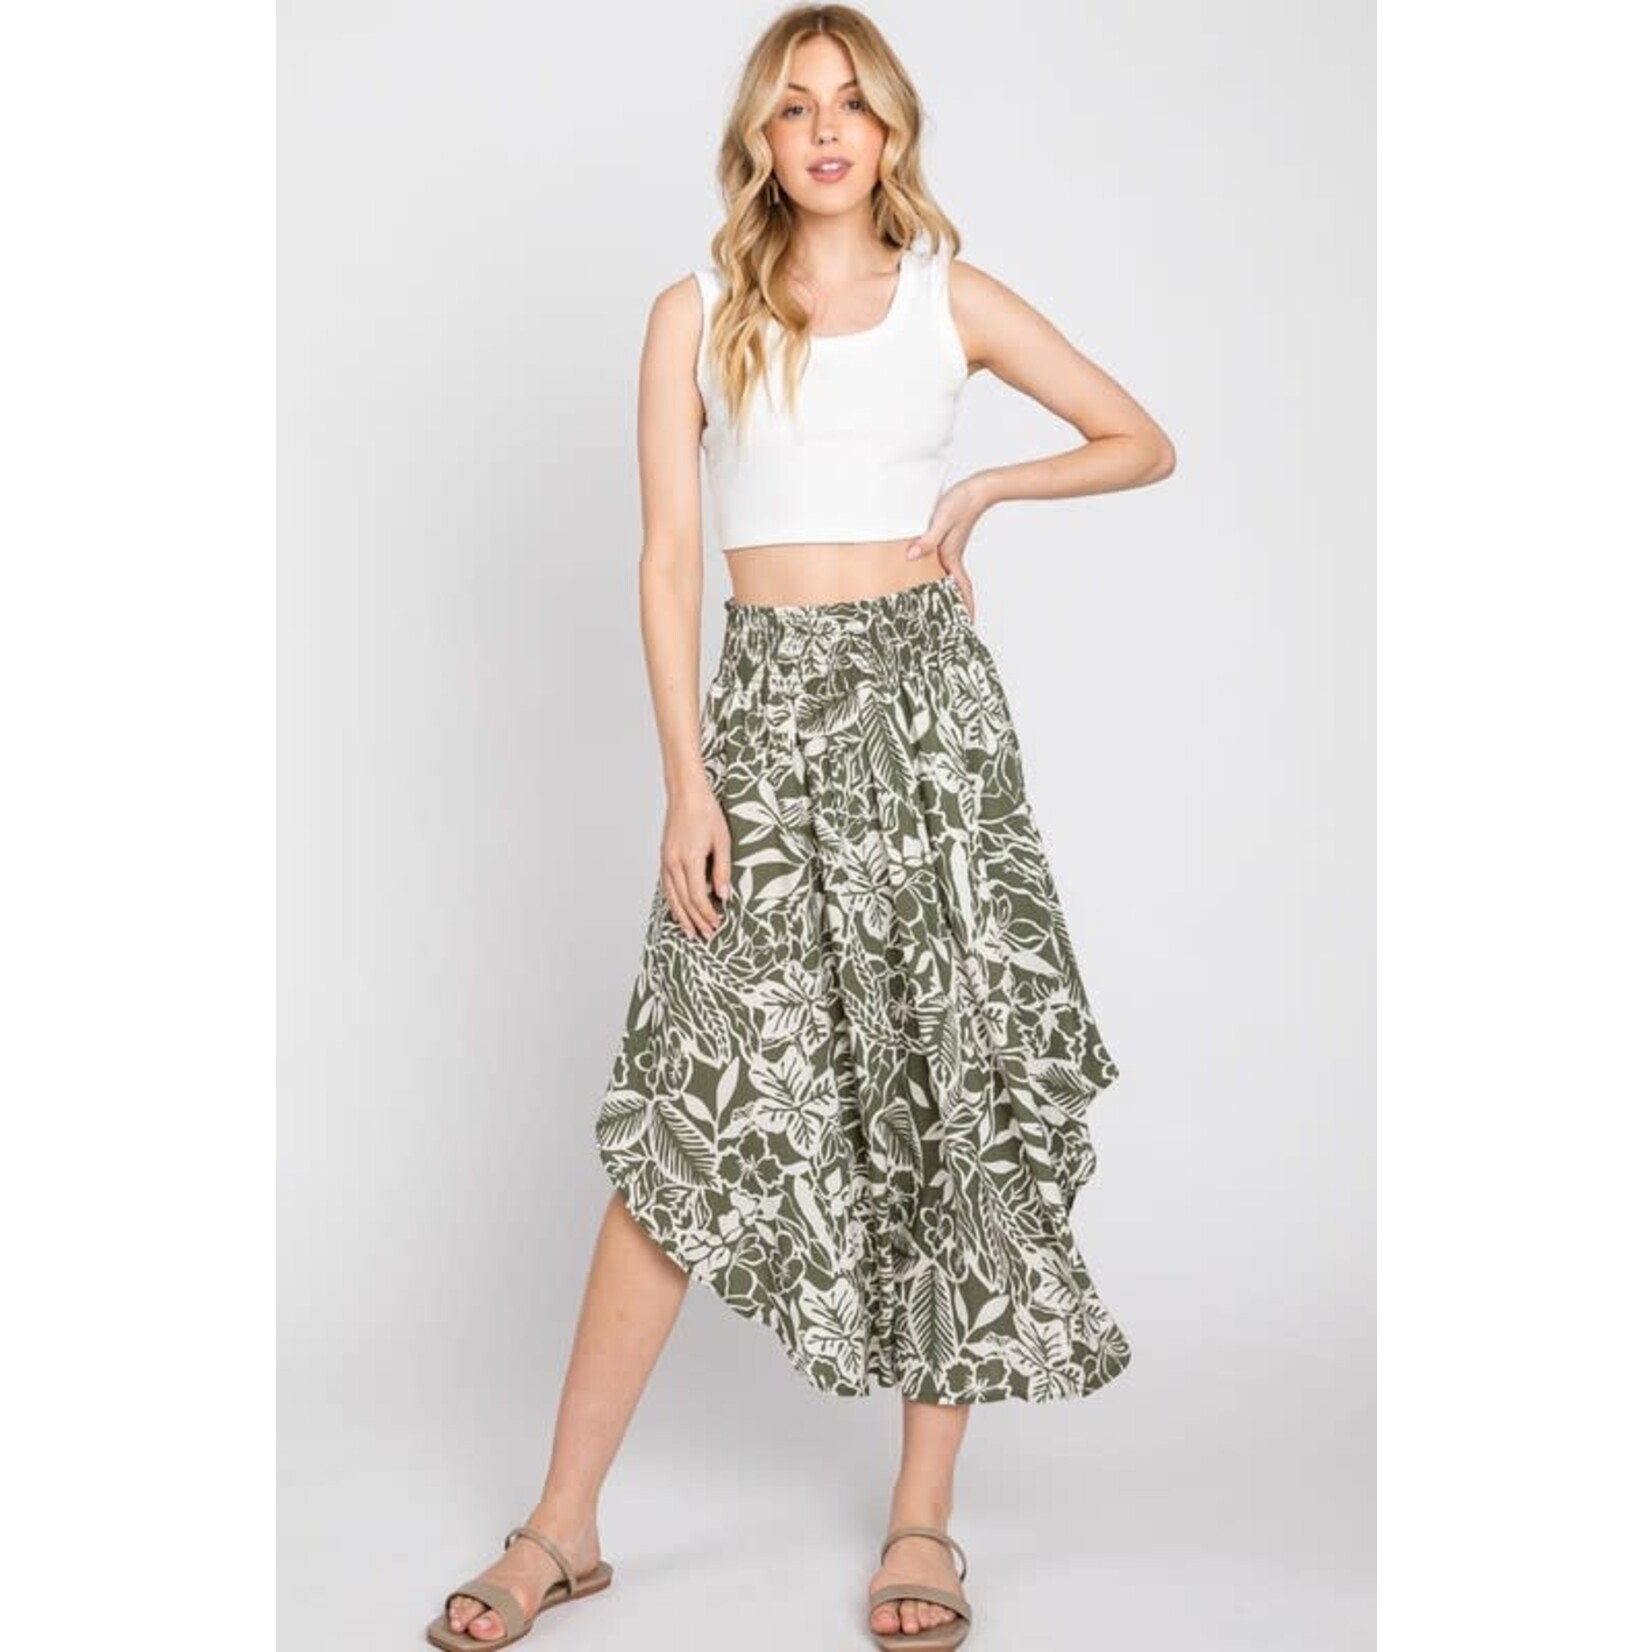 Final Touch Sonia Printed Smocked Skirt